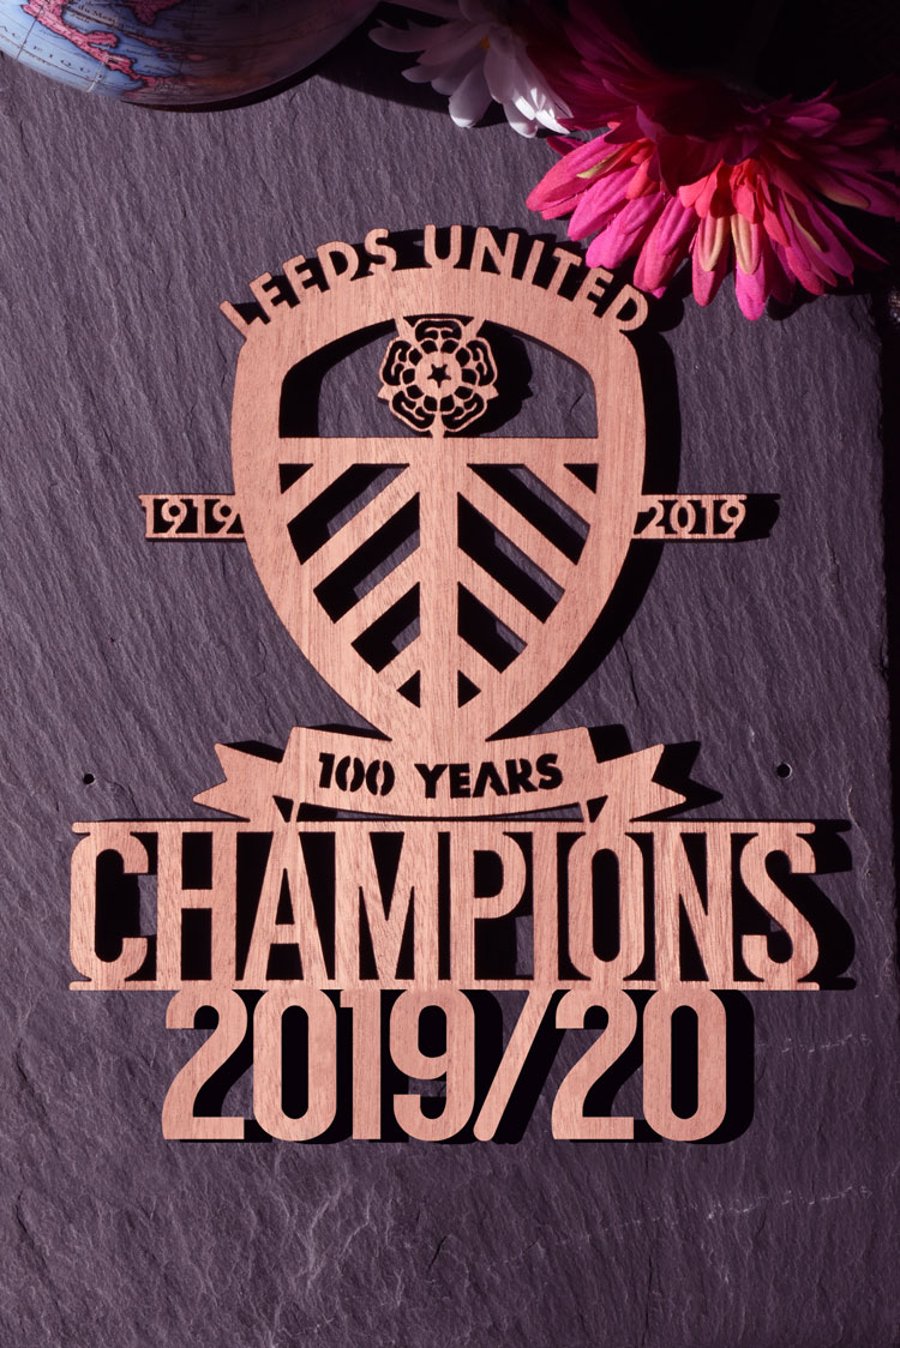 Leeds United Champions 2019-20 Wall Plaque